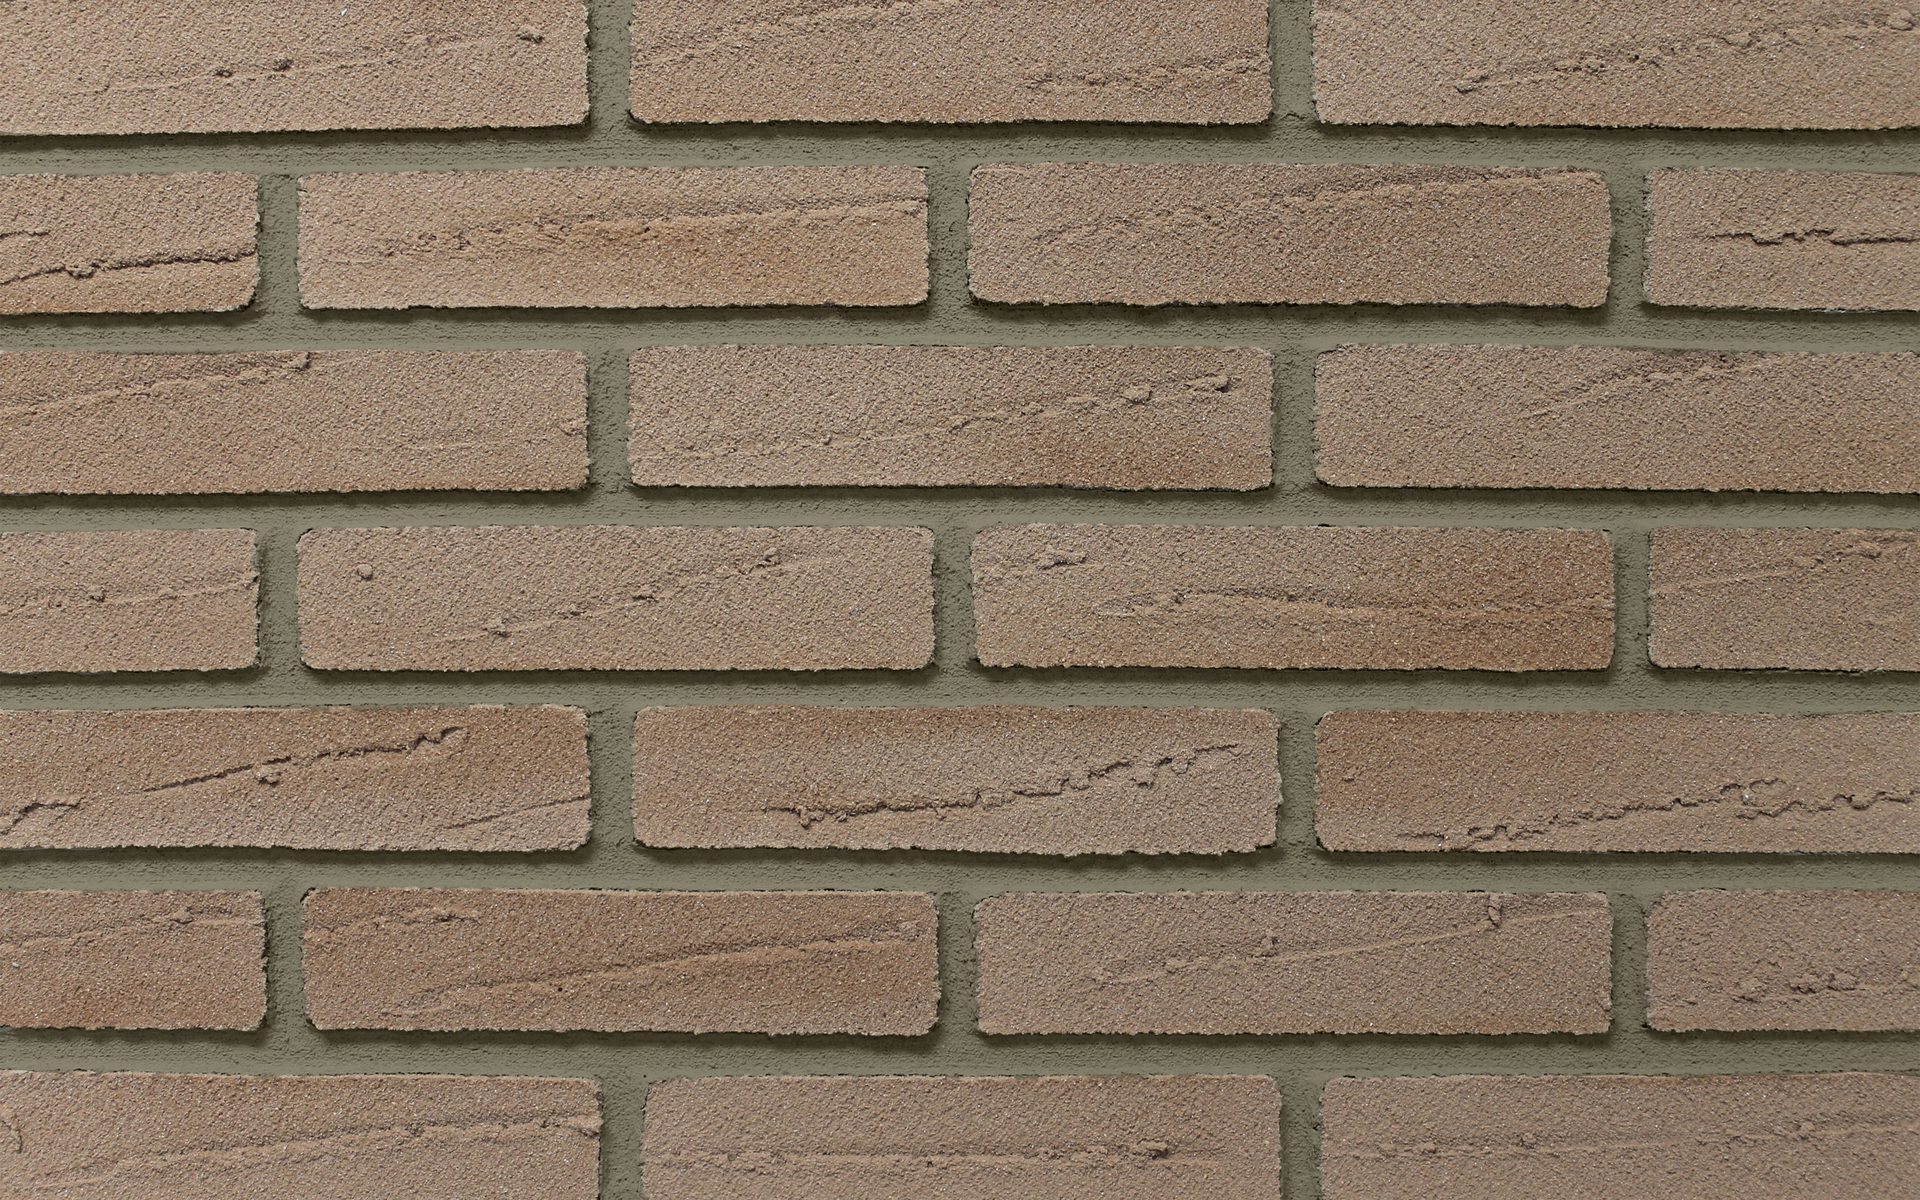 swatch of StoCast brick product called Kensington